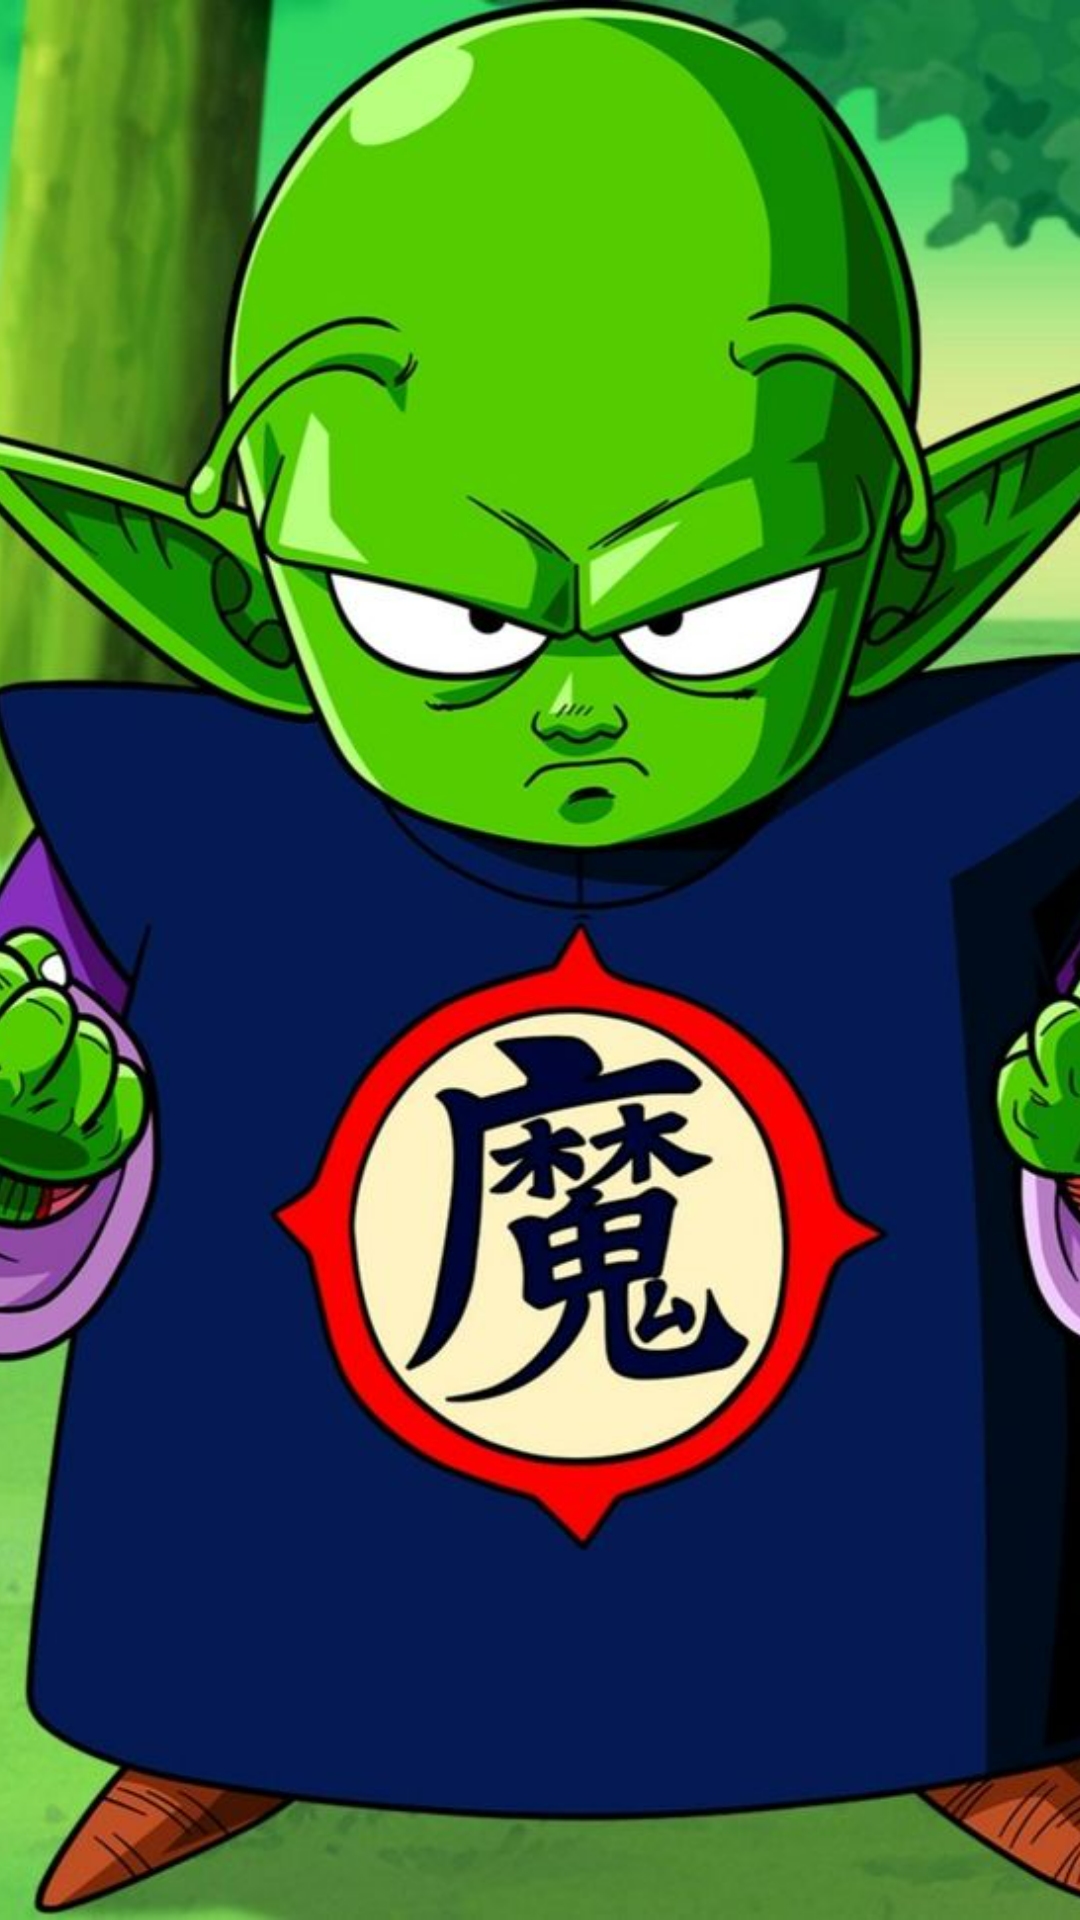 Piccolo Images